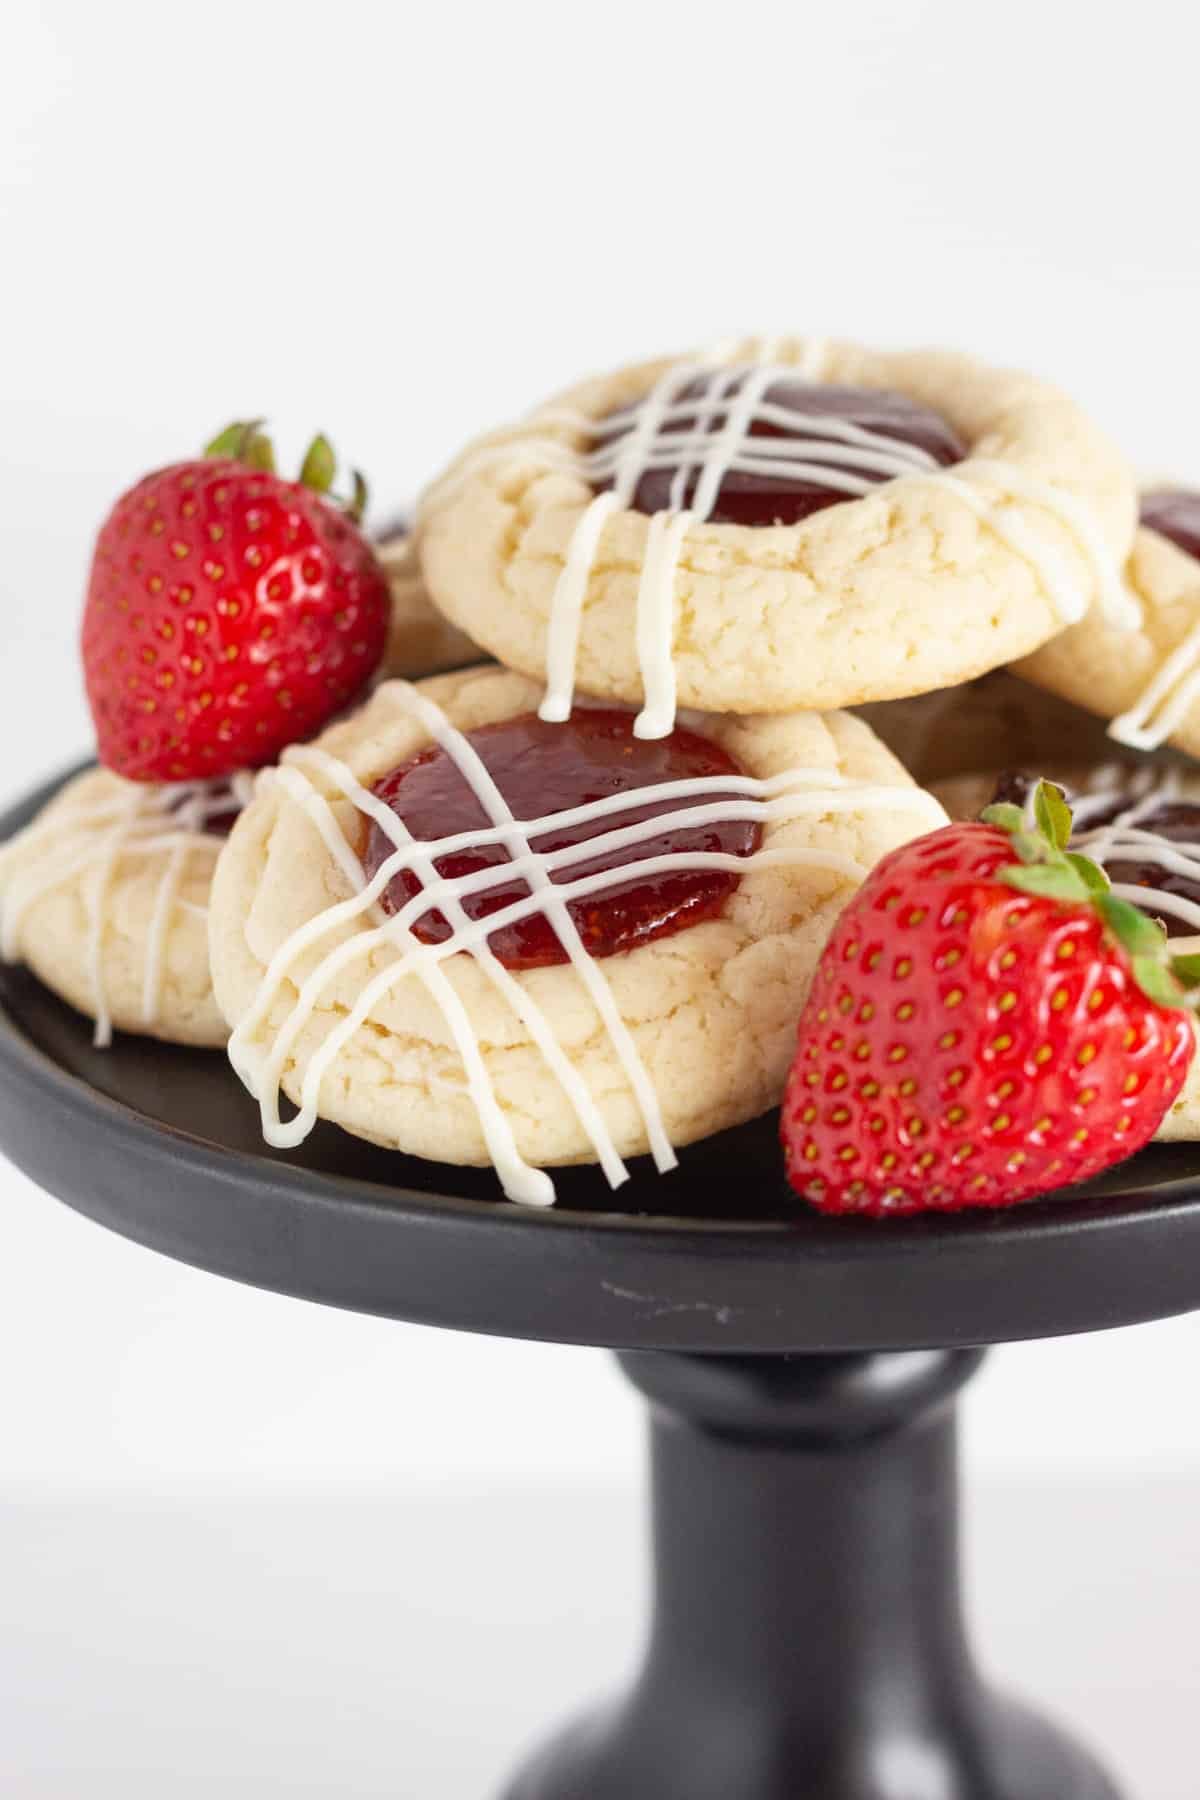 Easy Strawberry Jam Cookies are on a black cake plate.  The cookies are drizzled with while chocolate and a couple of fresh strawberries are on the plate.